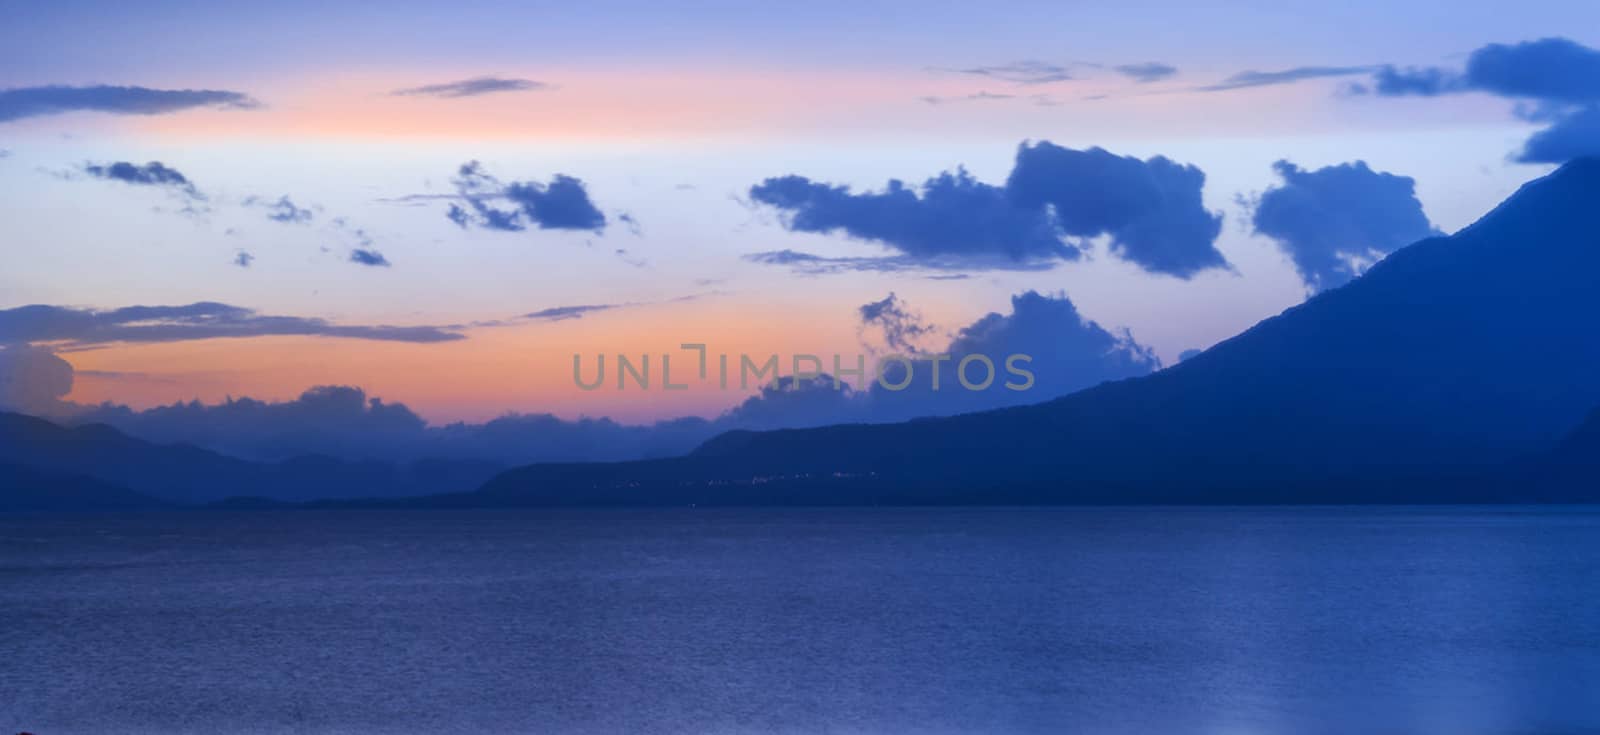 Beautiful pictures of Guatemala